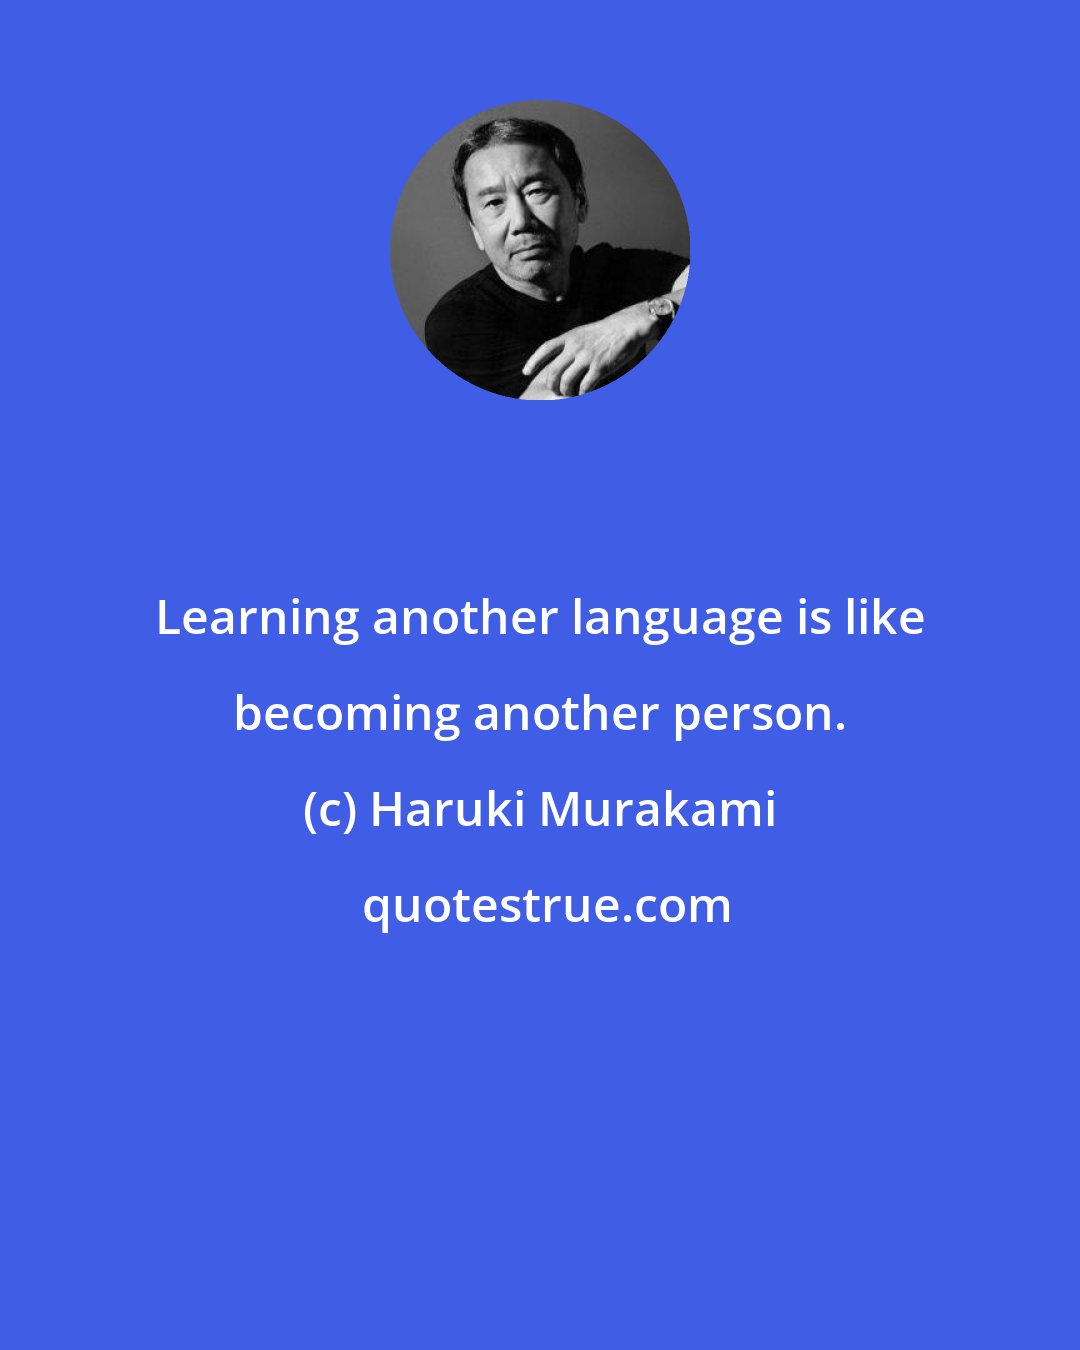 Haruki Murakami: Learning another language is like becoming another person.